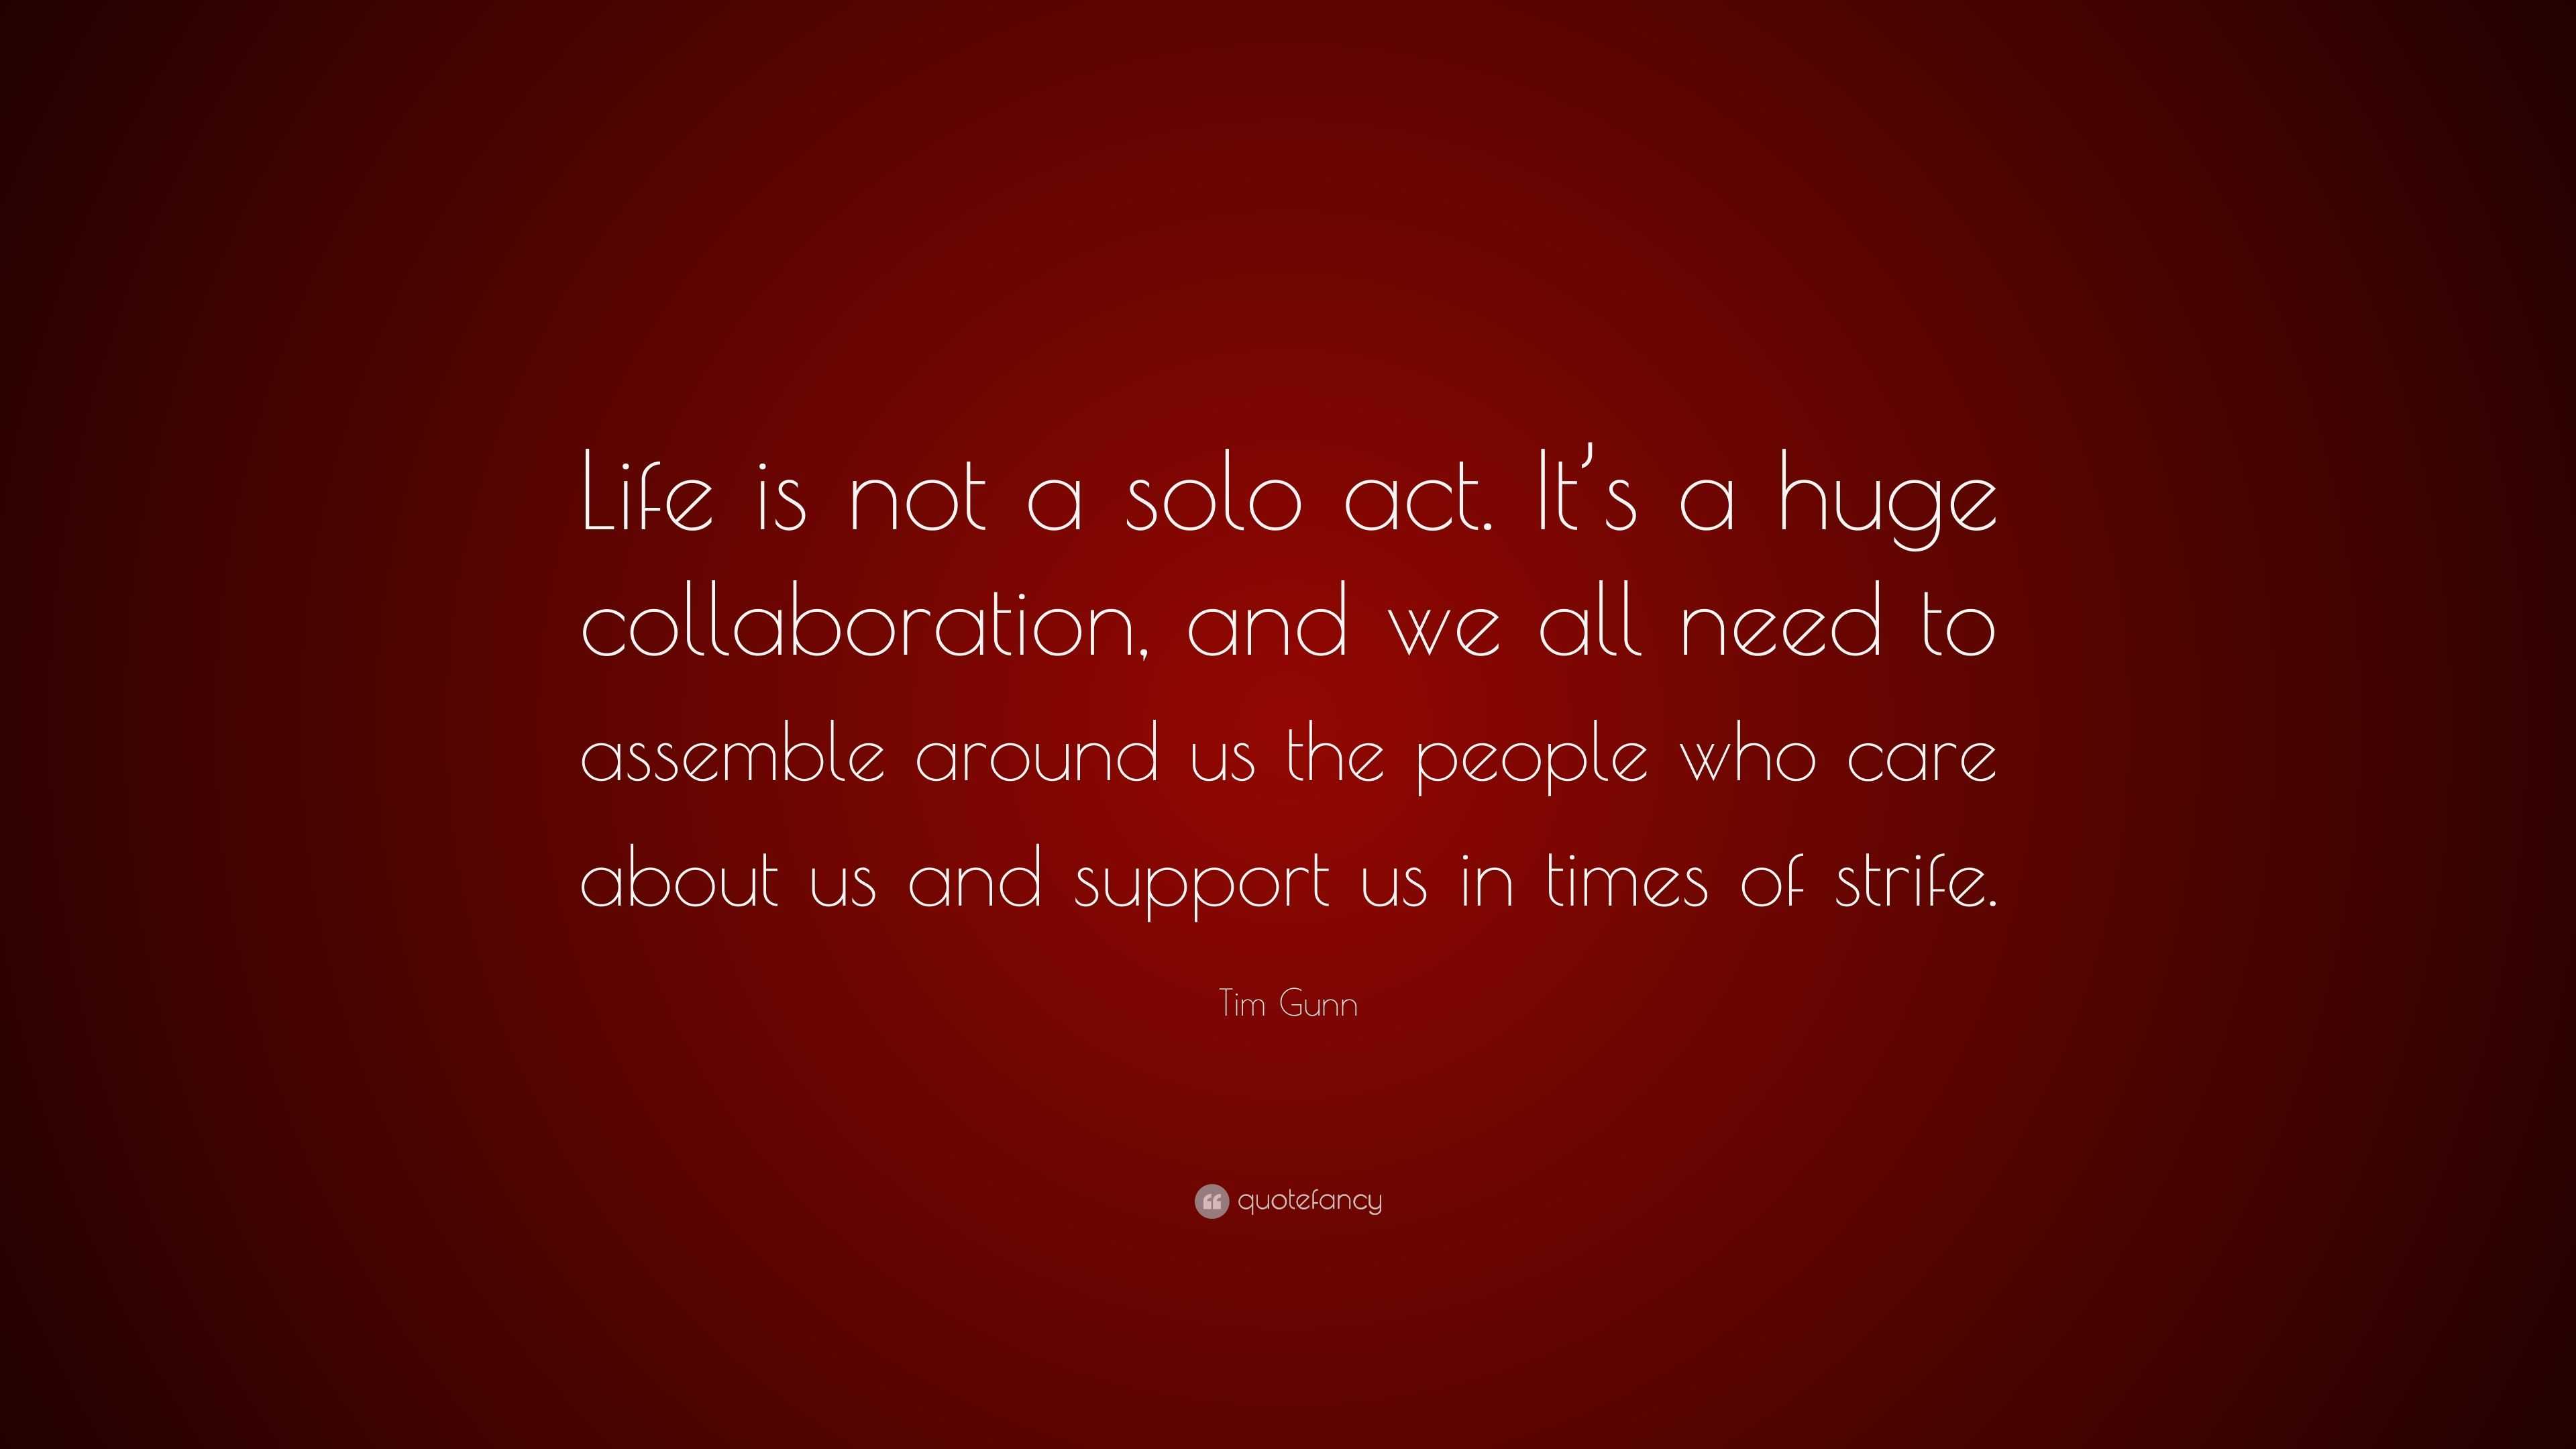 Tim Gunn Quote: “Life is not a solo act. It’s a huge collaboration, and ...